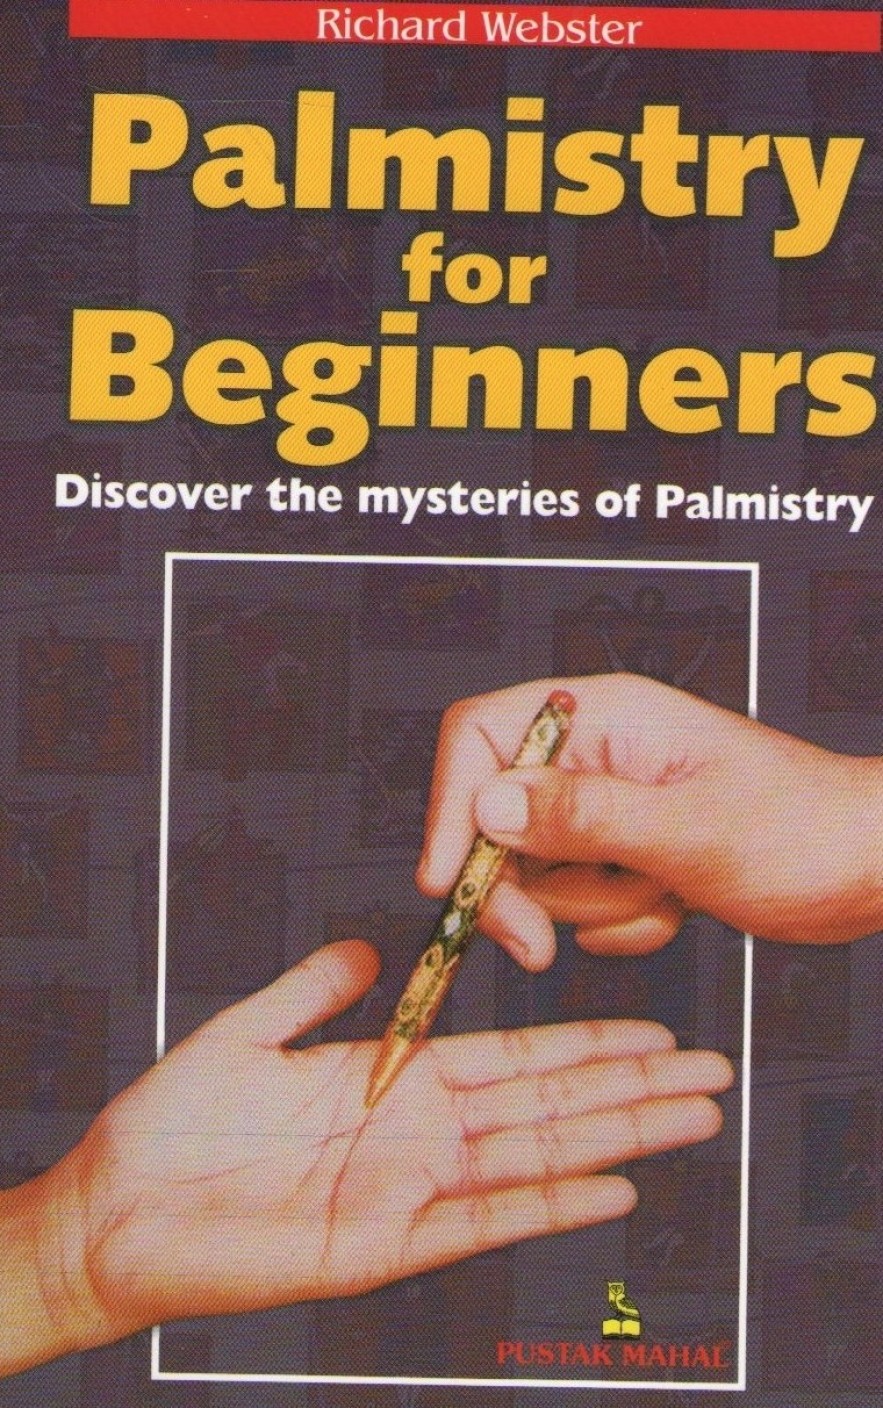 Palmistry for Beginners - Buy Palmistry for Beginners by RICHARD ...